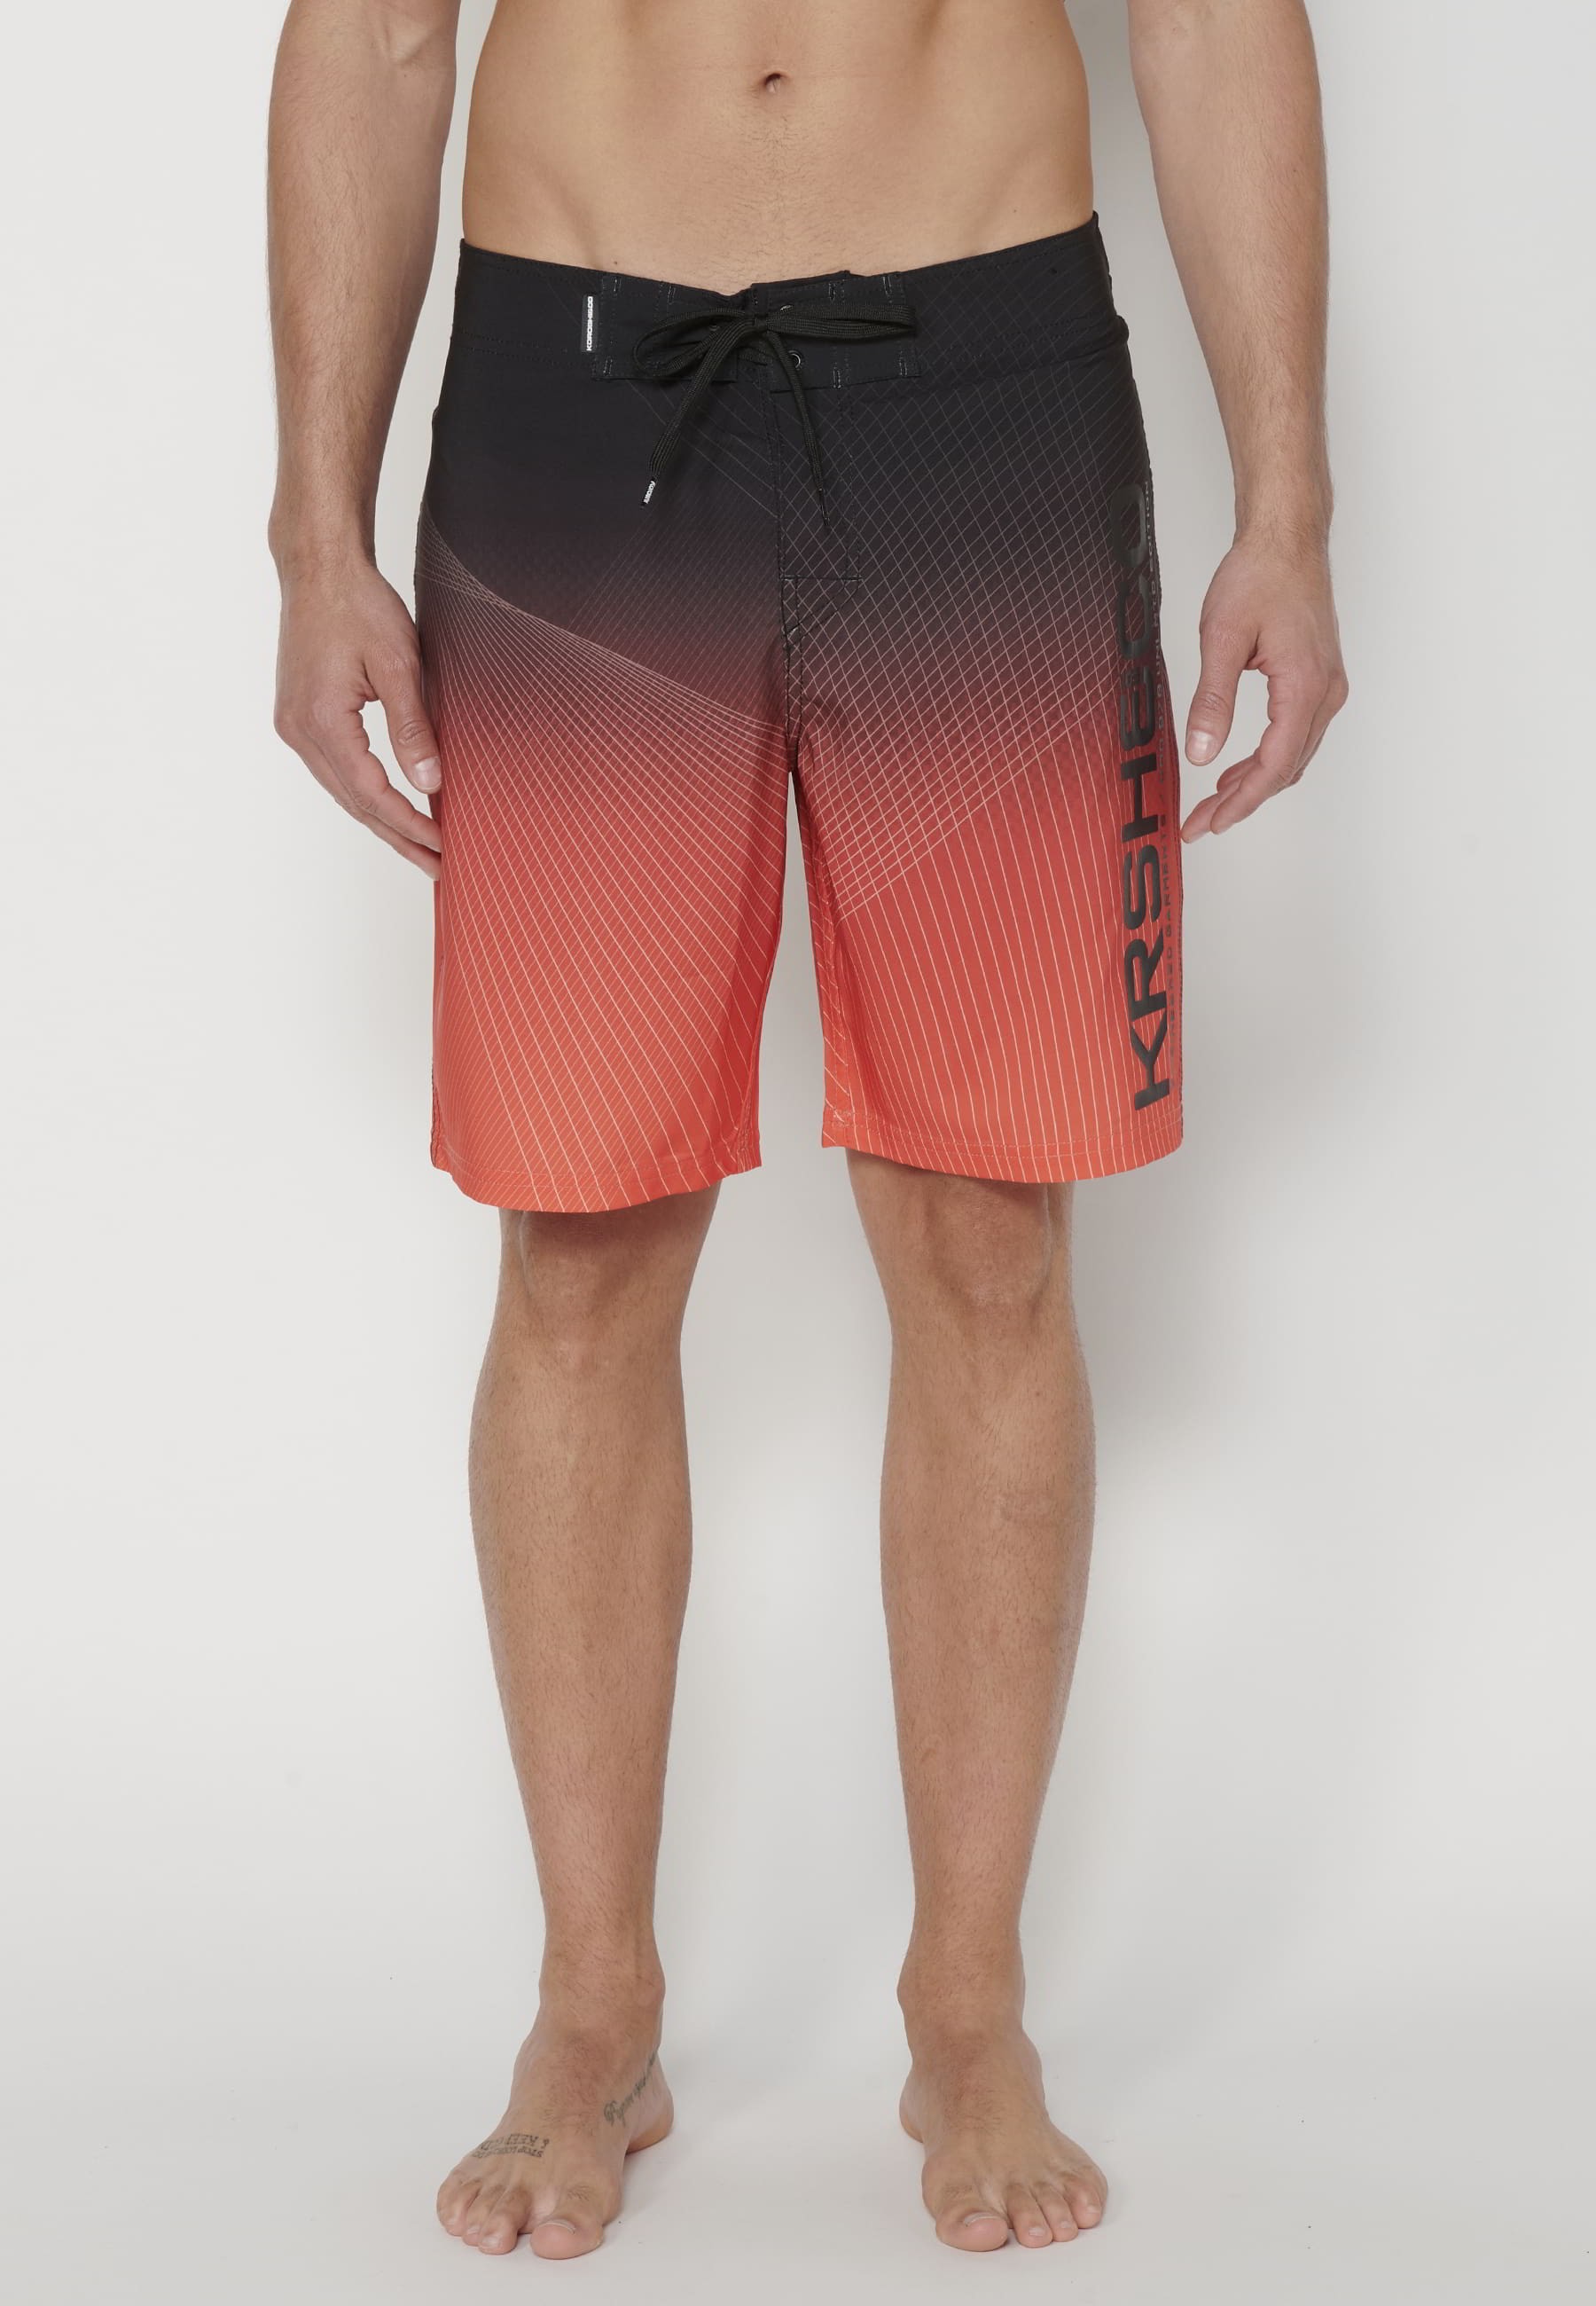 Short Surfer-style swimsuit with three Orange Pockets for Men 2